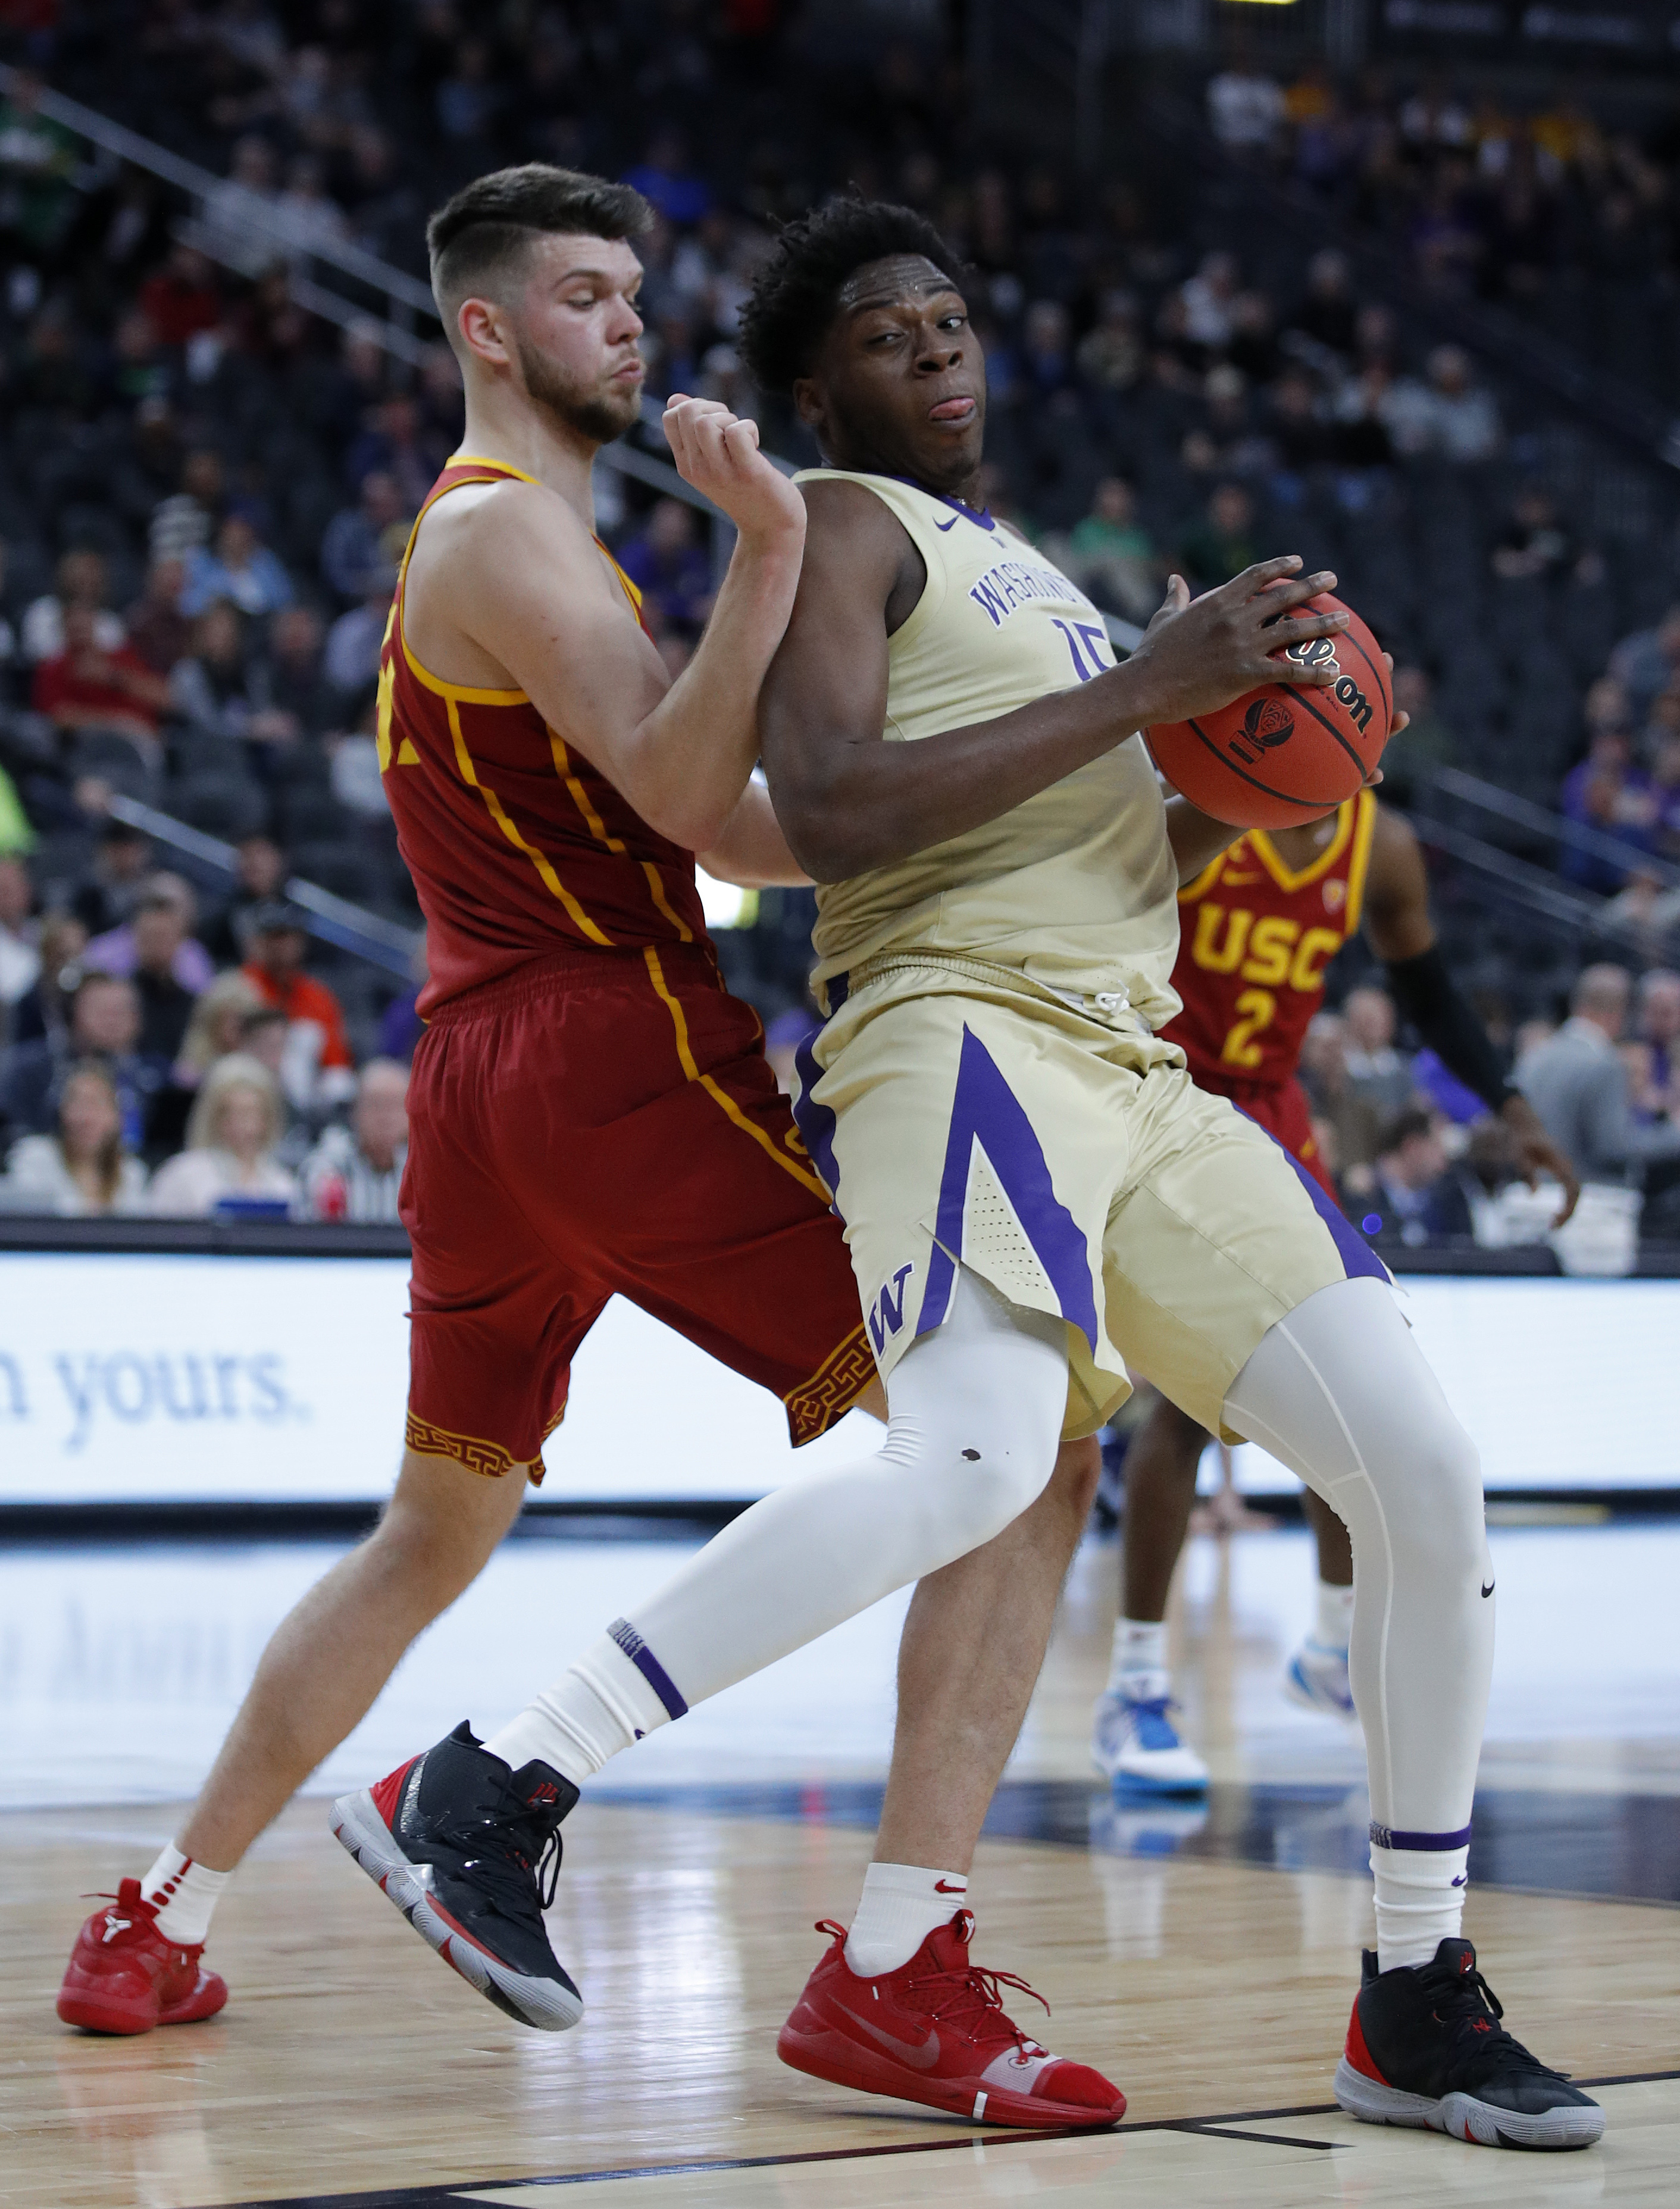 Washington holds off USC 78-75 in Pac-12 quarterfinals